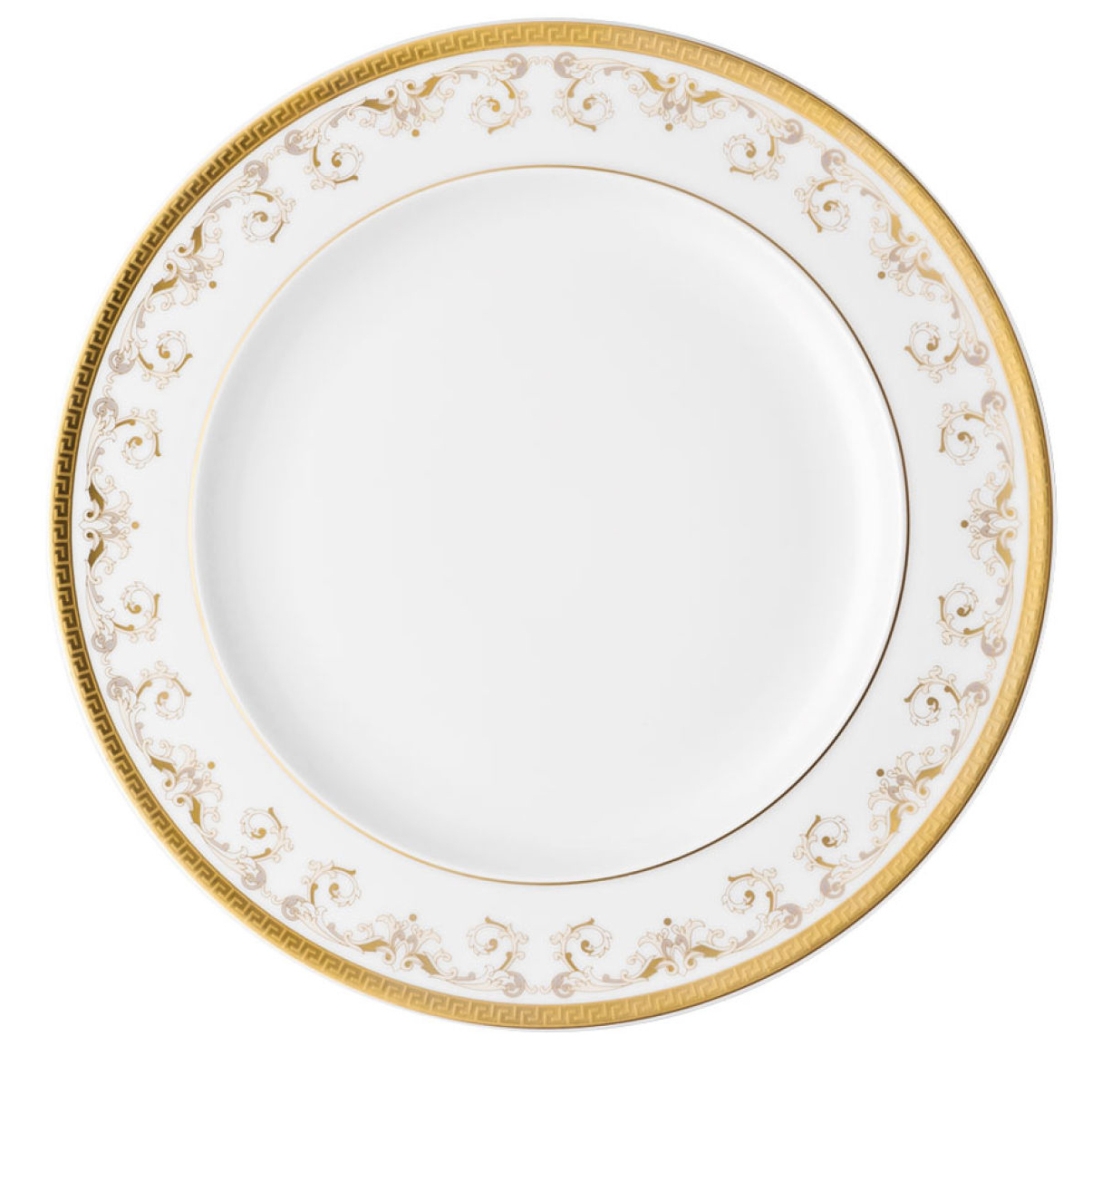 2 x plate in porcelain - Rosenthal